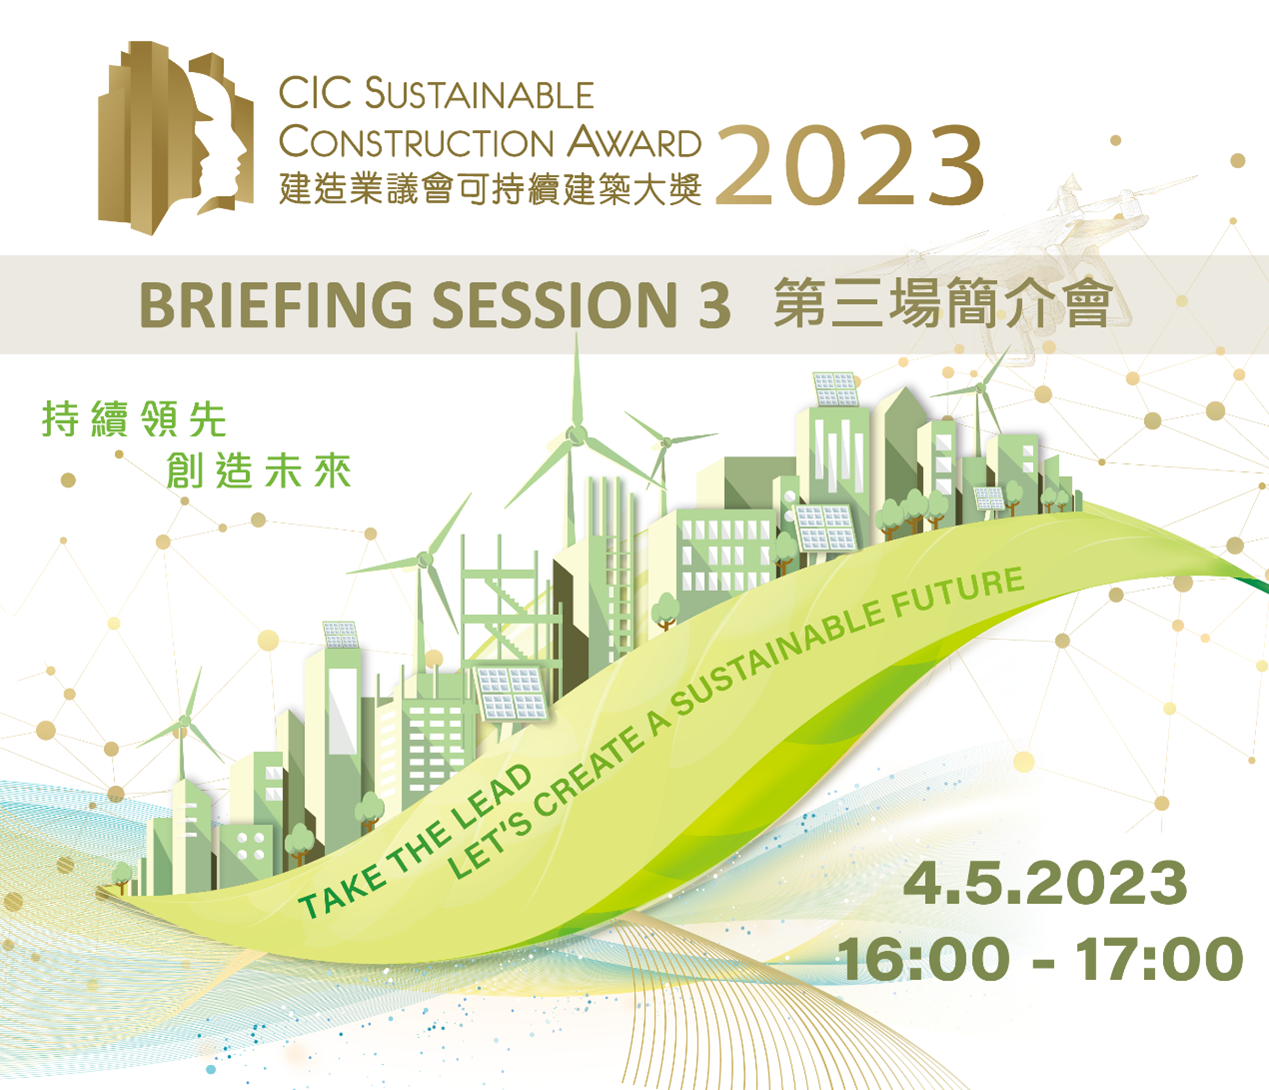 CIC Sustainable Construction Award (SCA) 2023 – 3rd Briefing Session